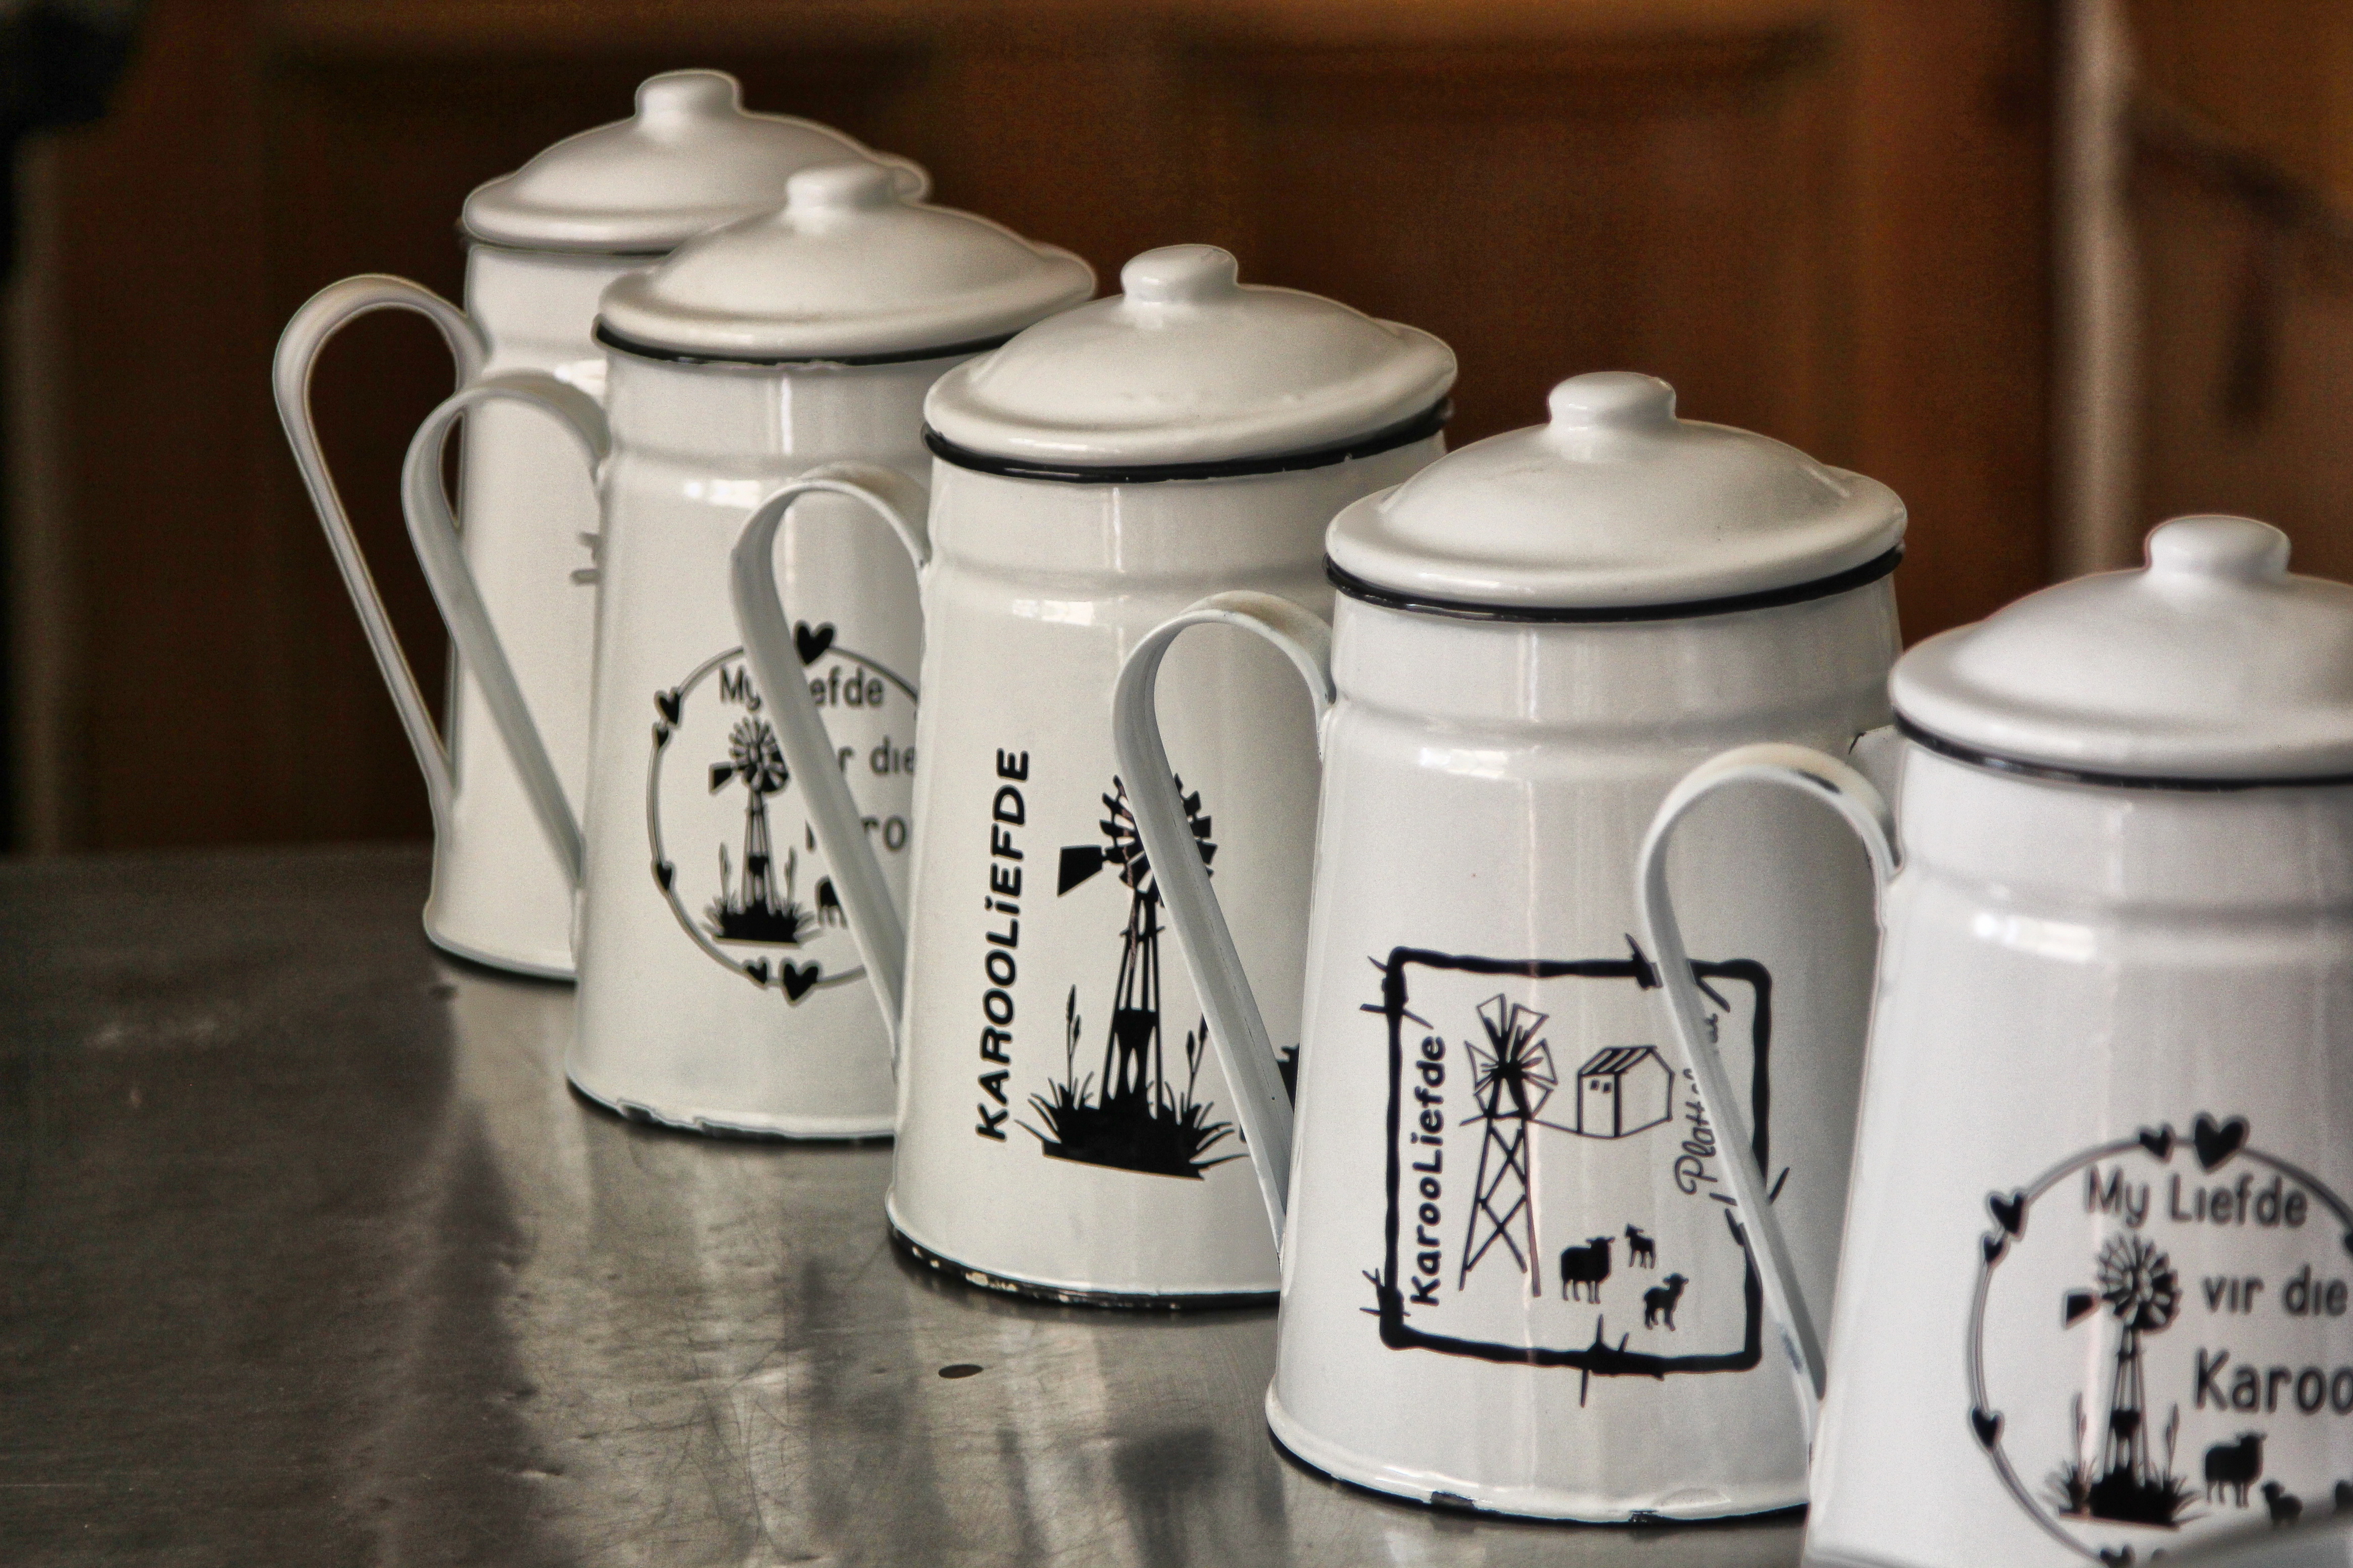 Karoo-branded enamelware sold for a good cause by Gentlecare.